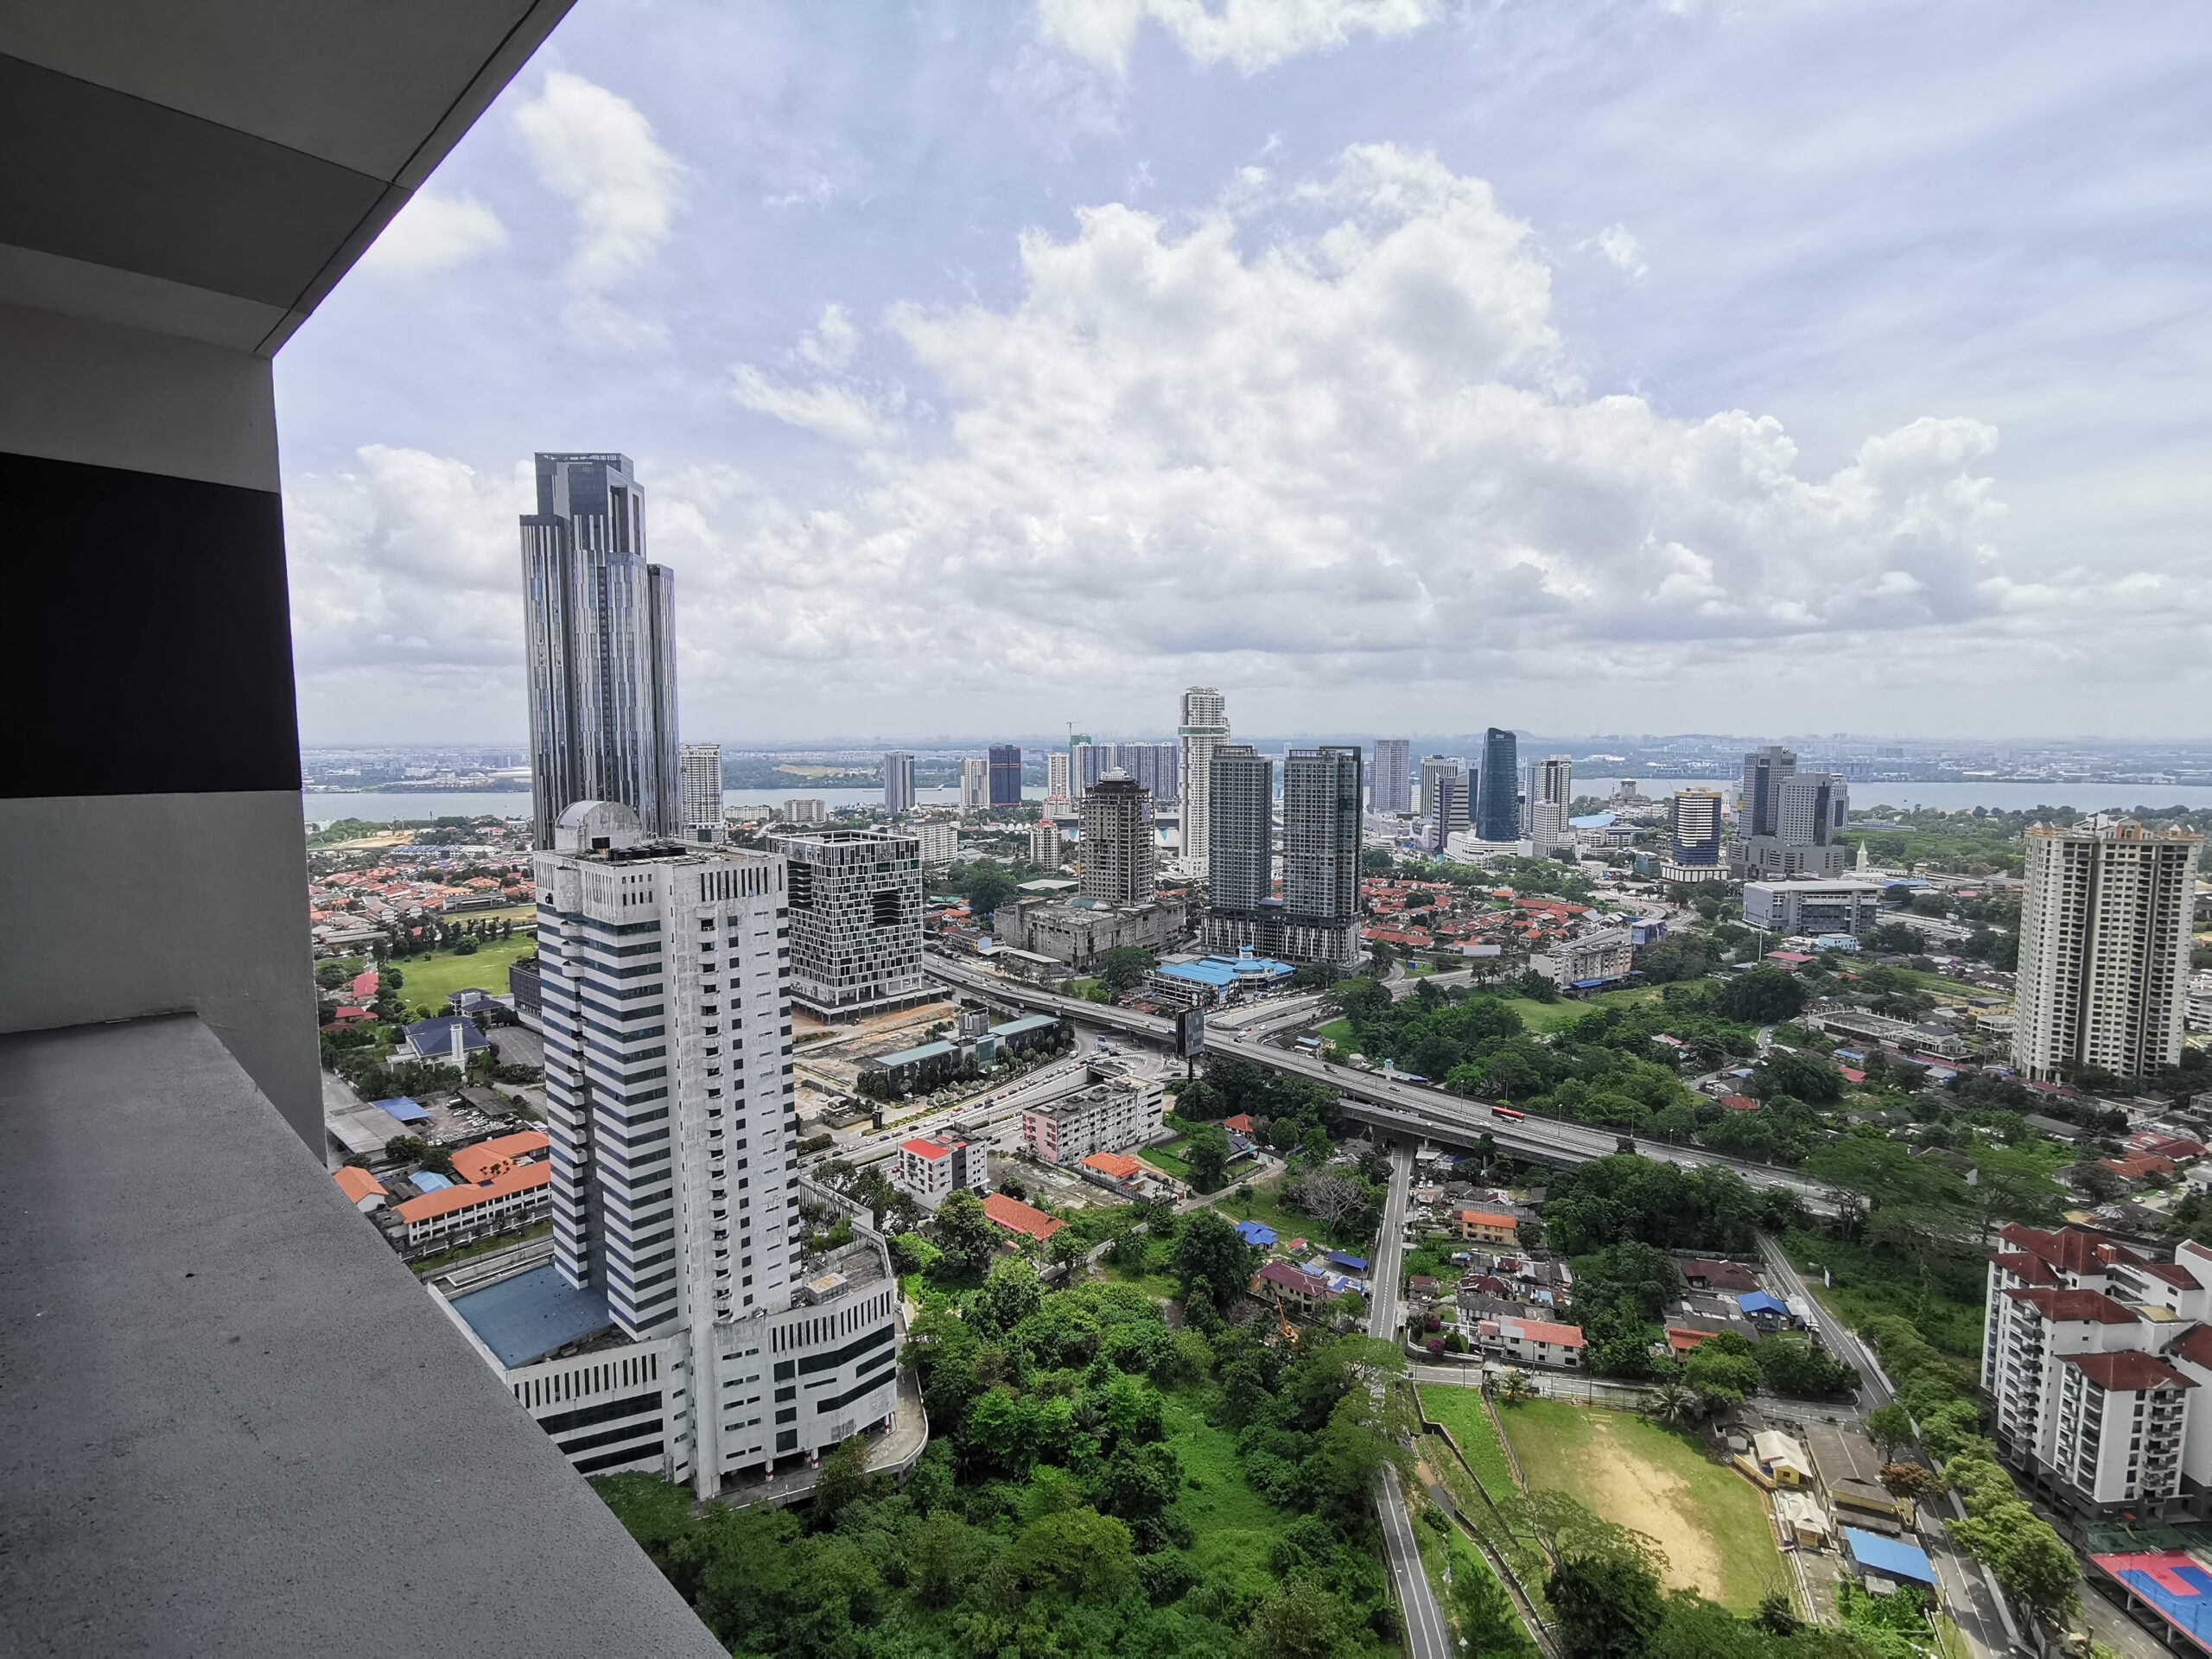 Malaysia ranks among the top five preferred countries for Asian real estate investors